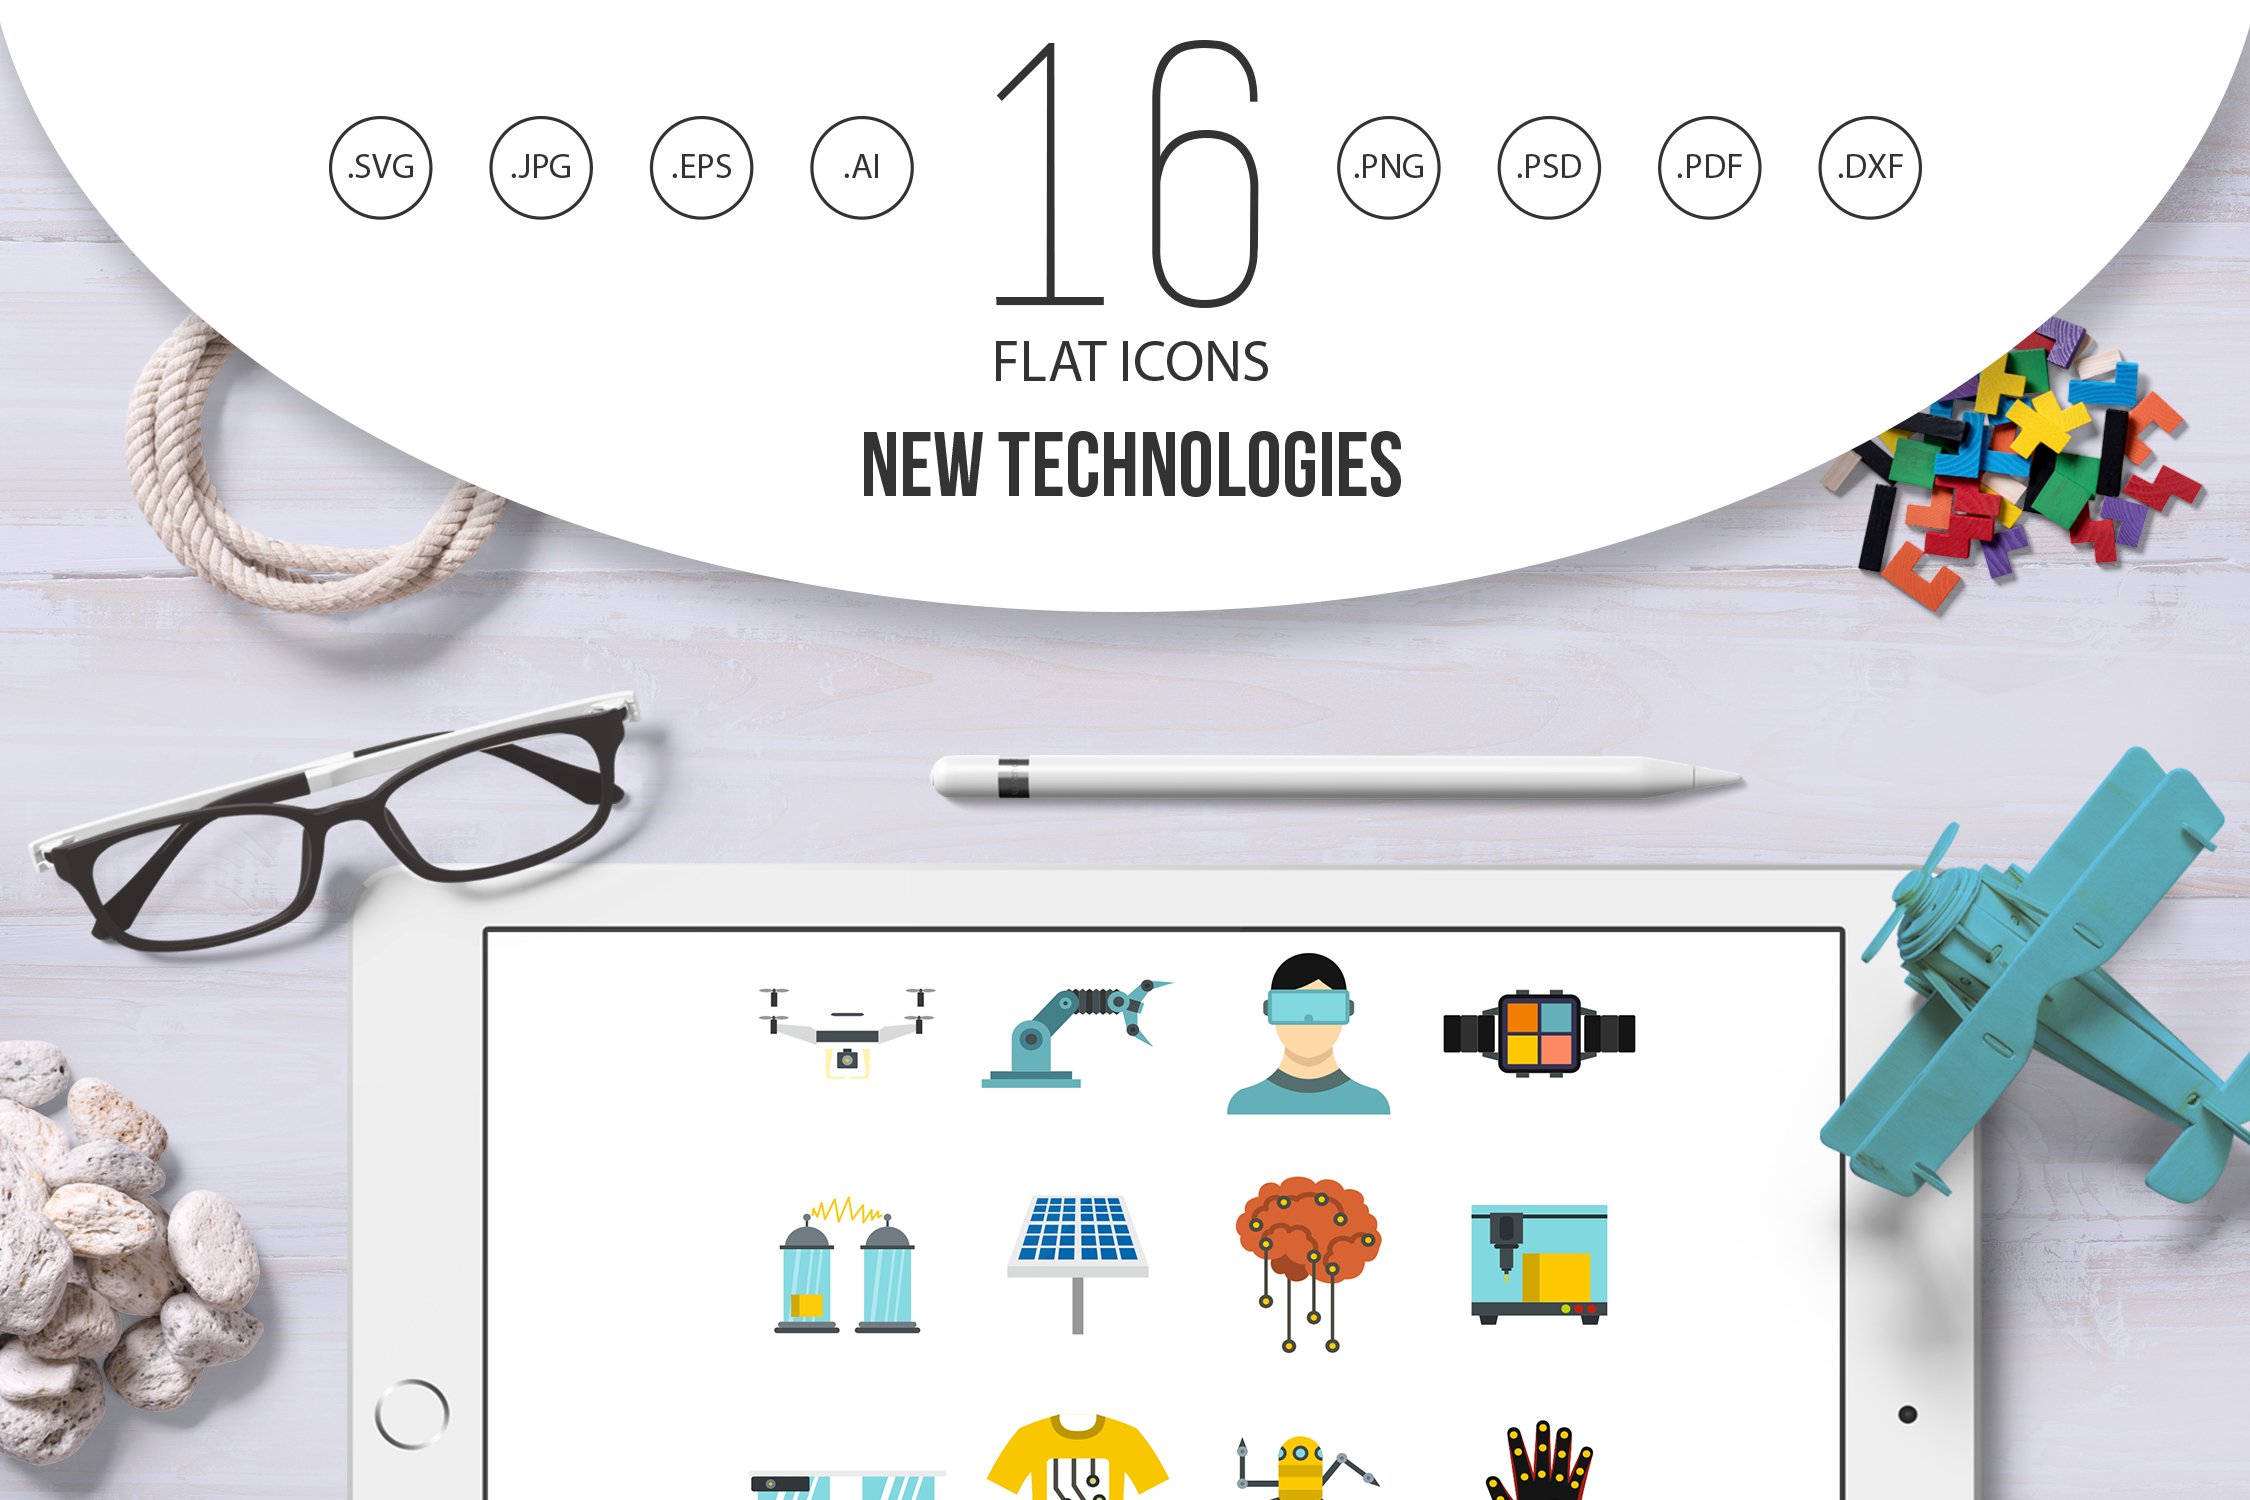 New technologies icons set, flat cover image.